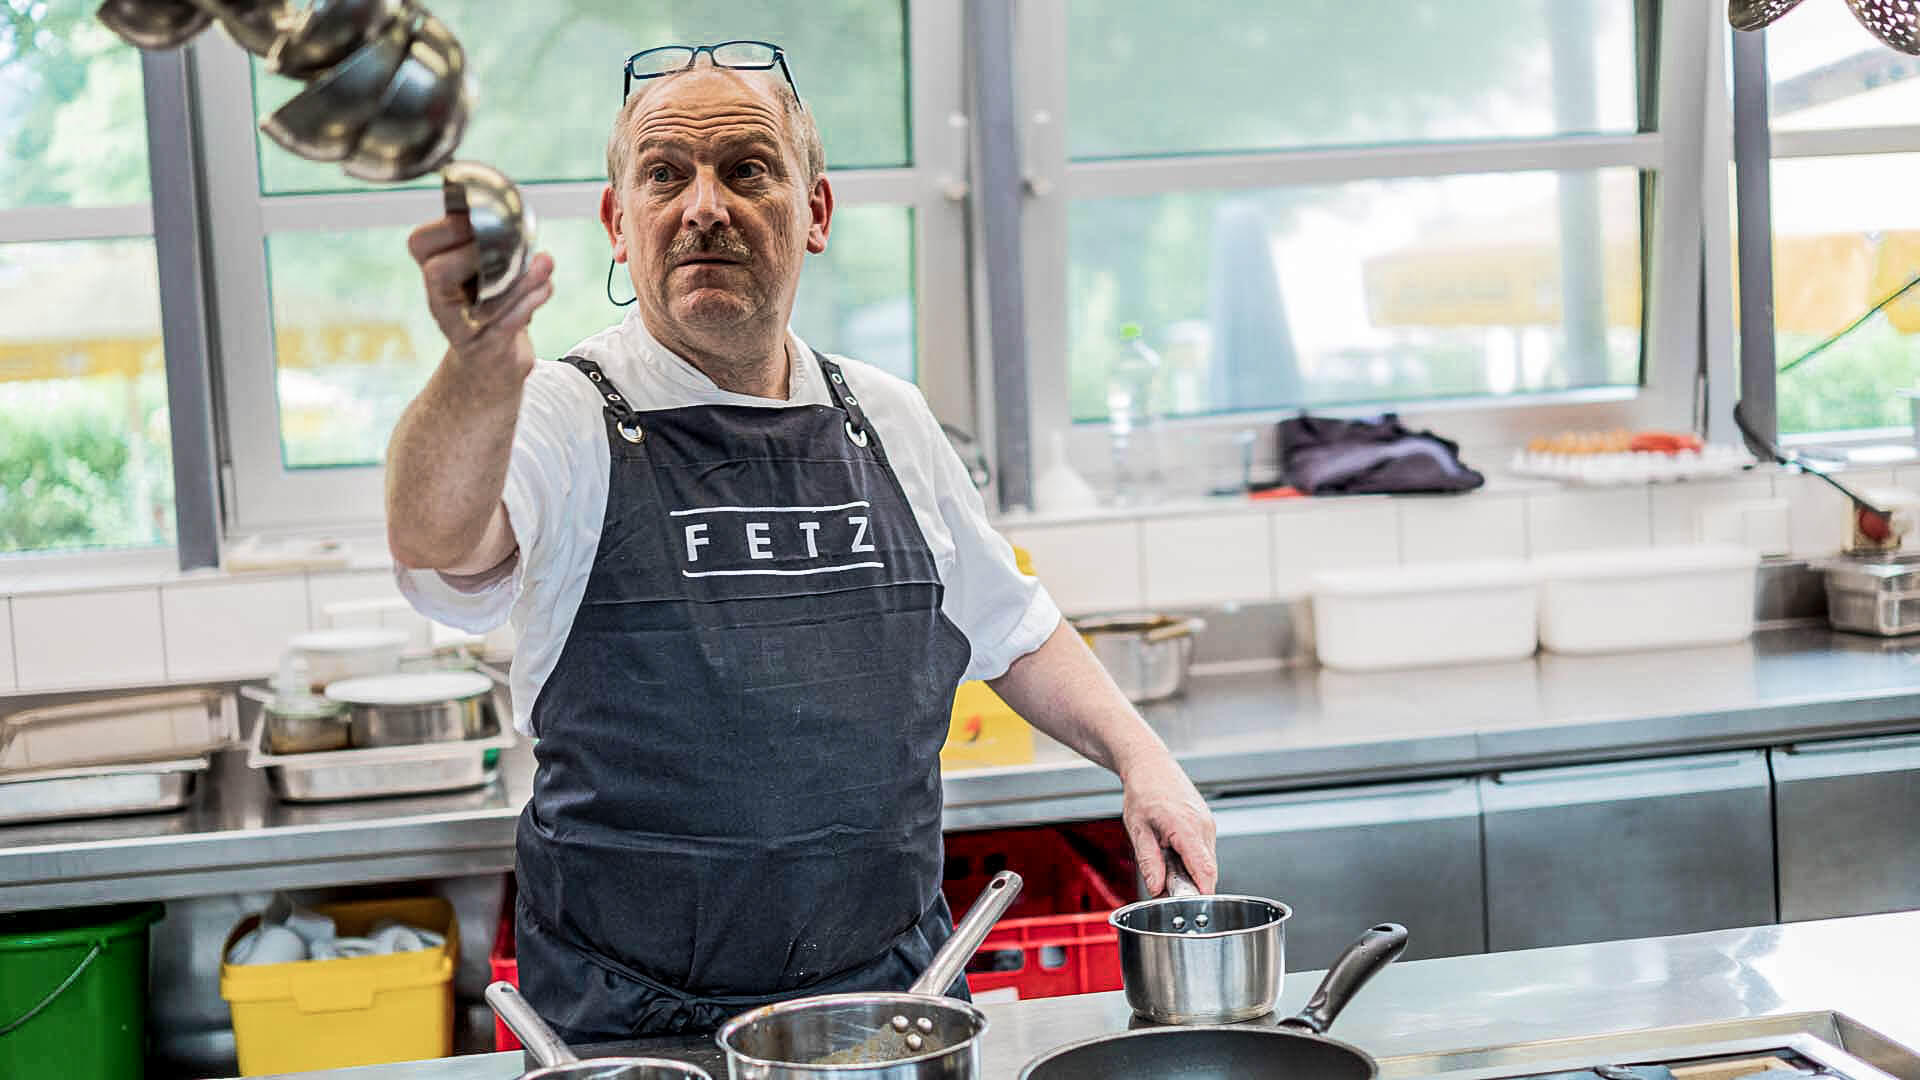 For Ludgar Fetz chef of the Jagdhaus in Oberstdorf, sustainable cuisine is radically regional.